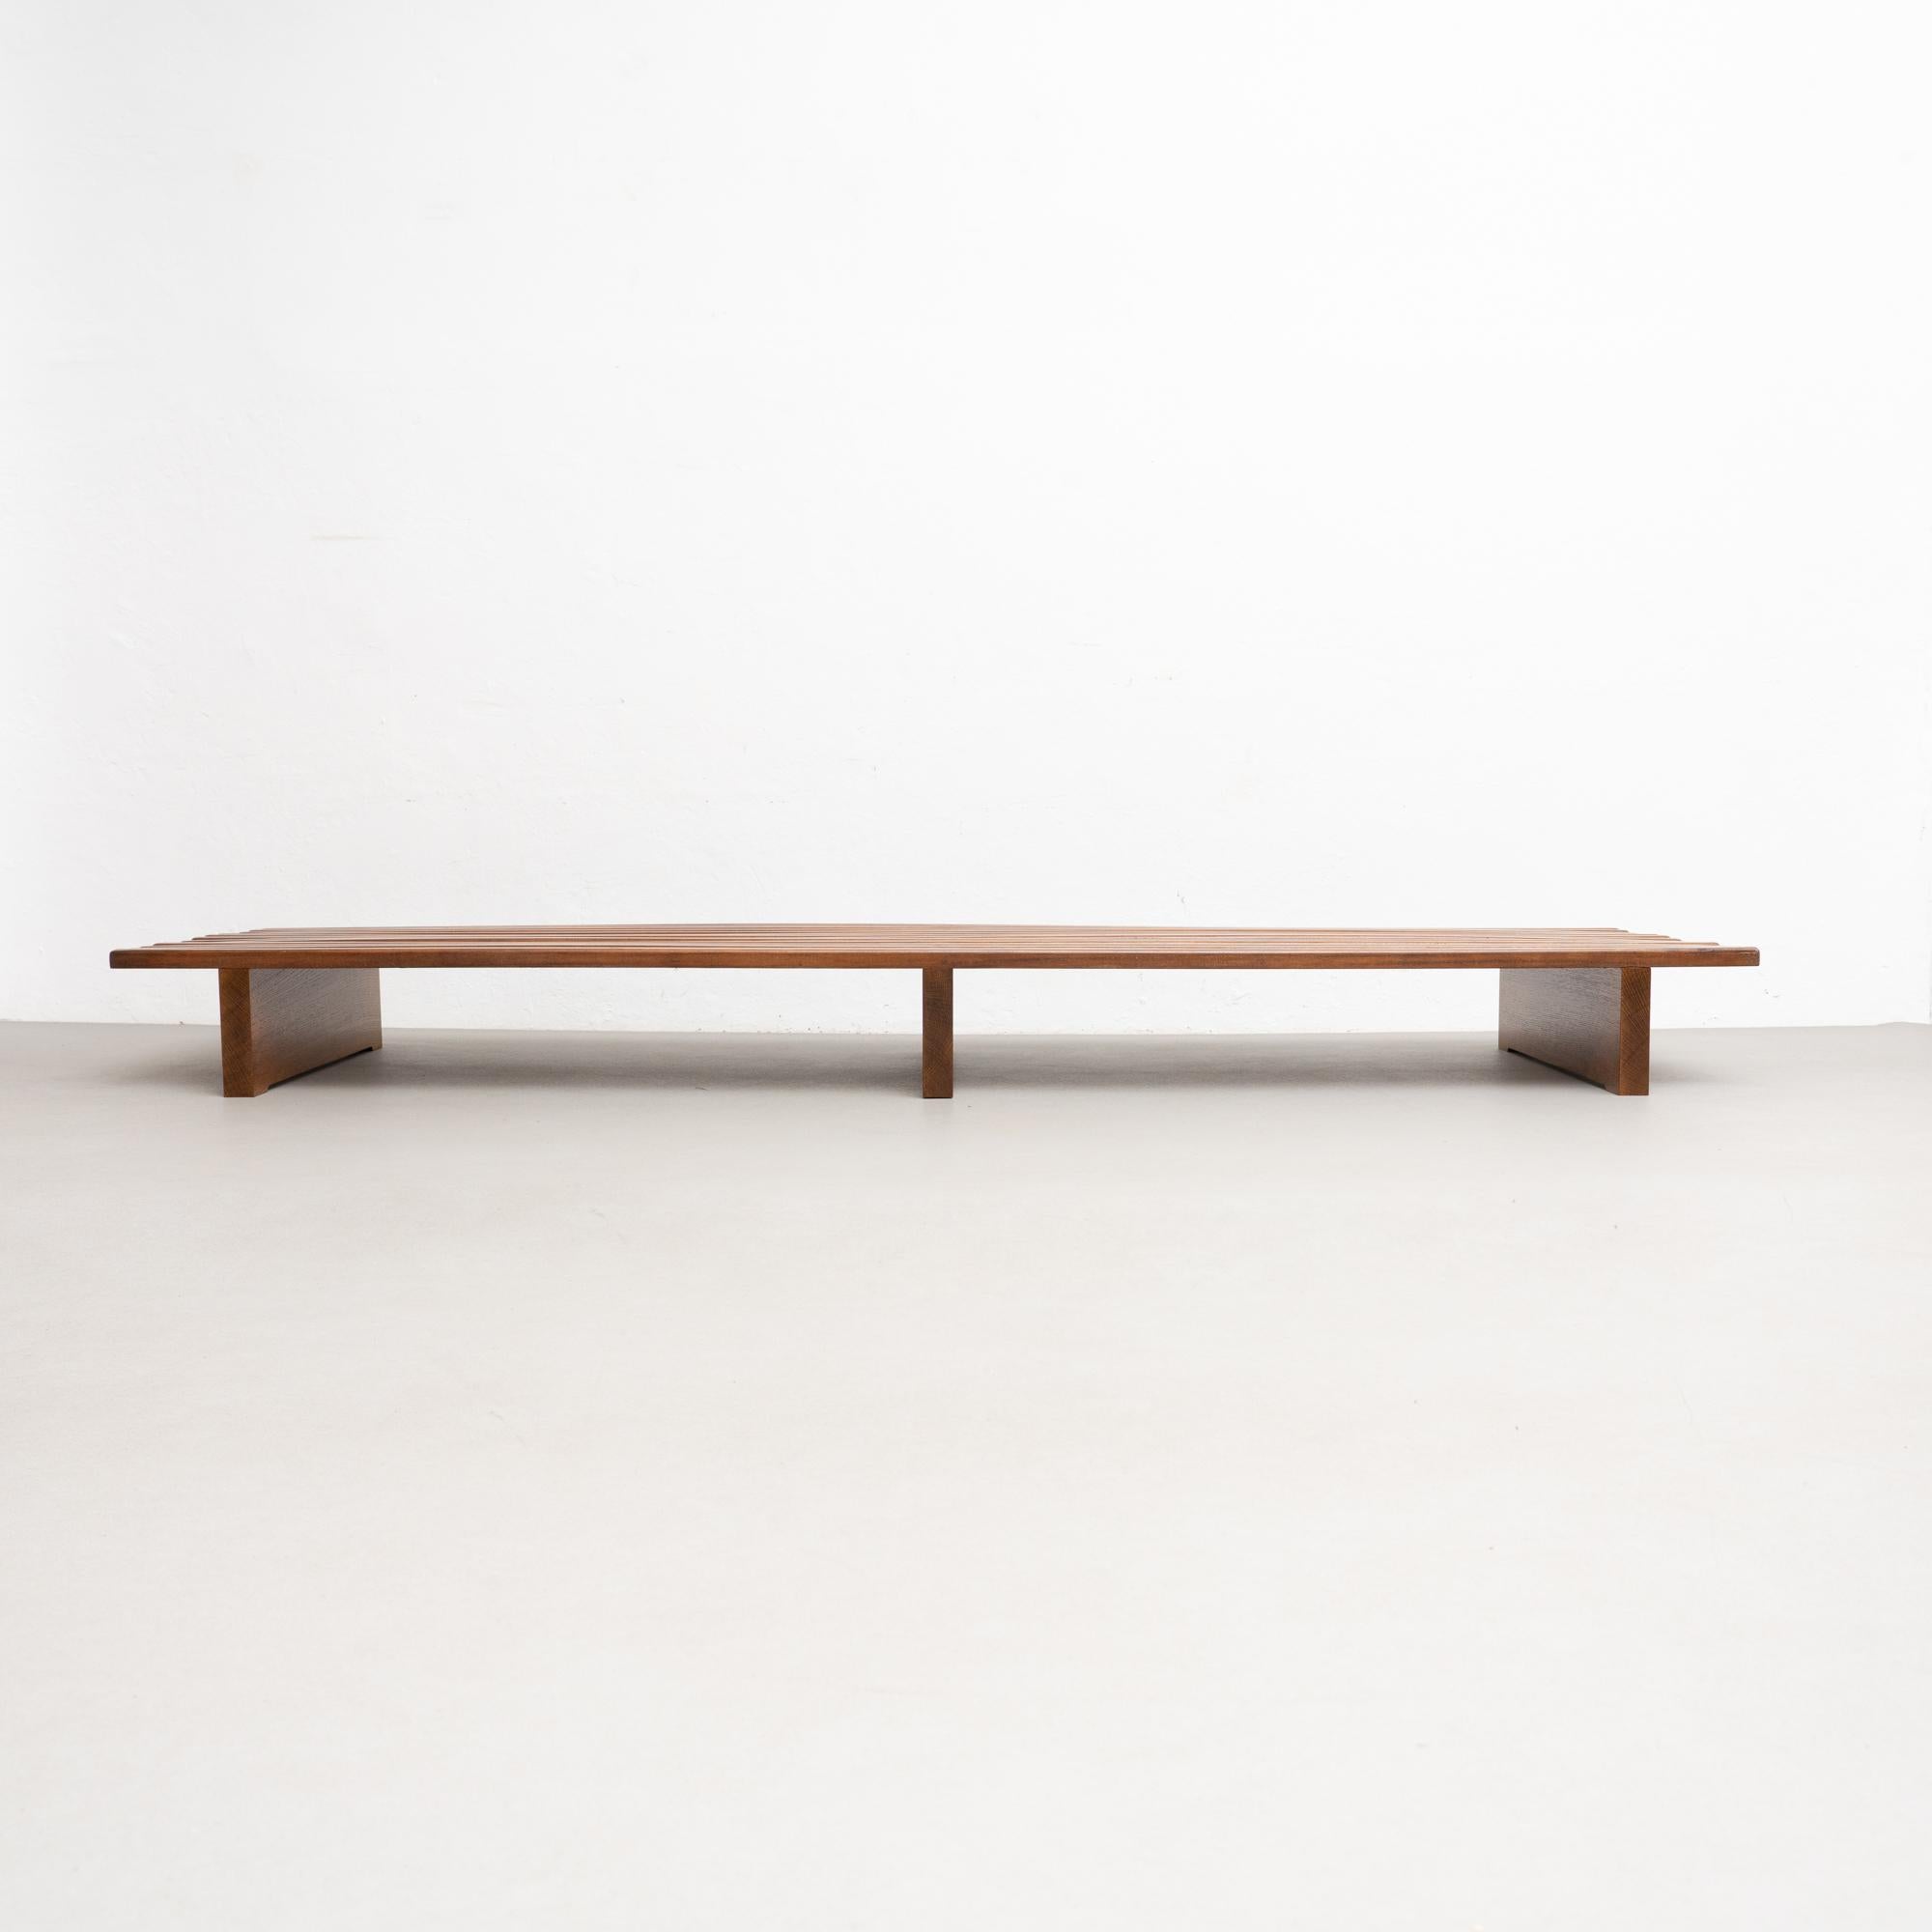 Original Cansado bench named after Cite Cansado, Mauritania.

Designed by Charlotte Perriand in France, circa 1950.

Wood base and structure.

Wooden legs seems to be latter added by previous owner.

Provenance: Cansado, Mauritania